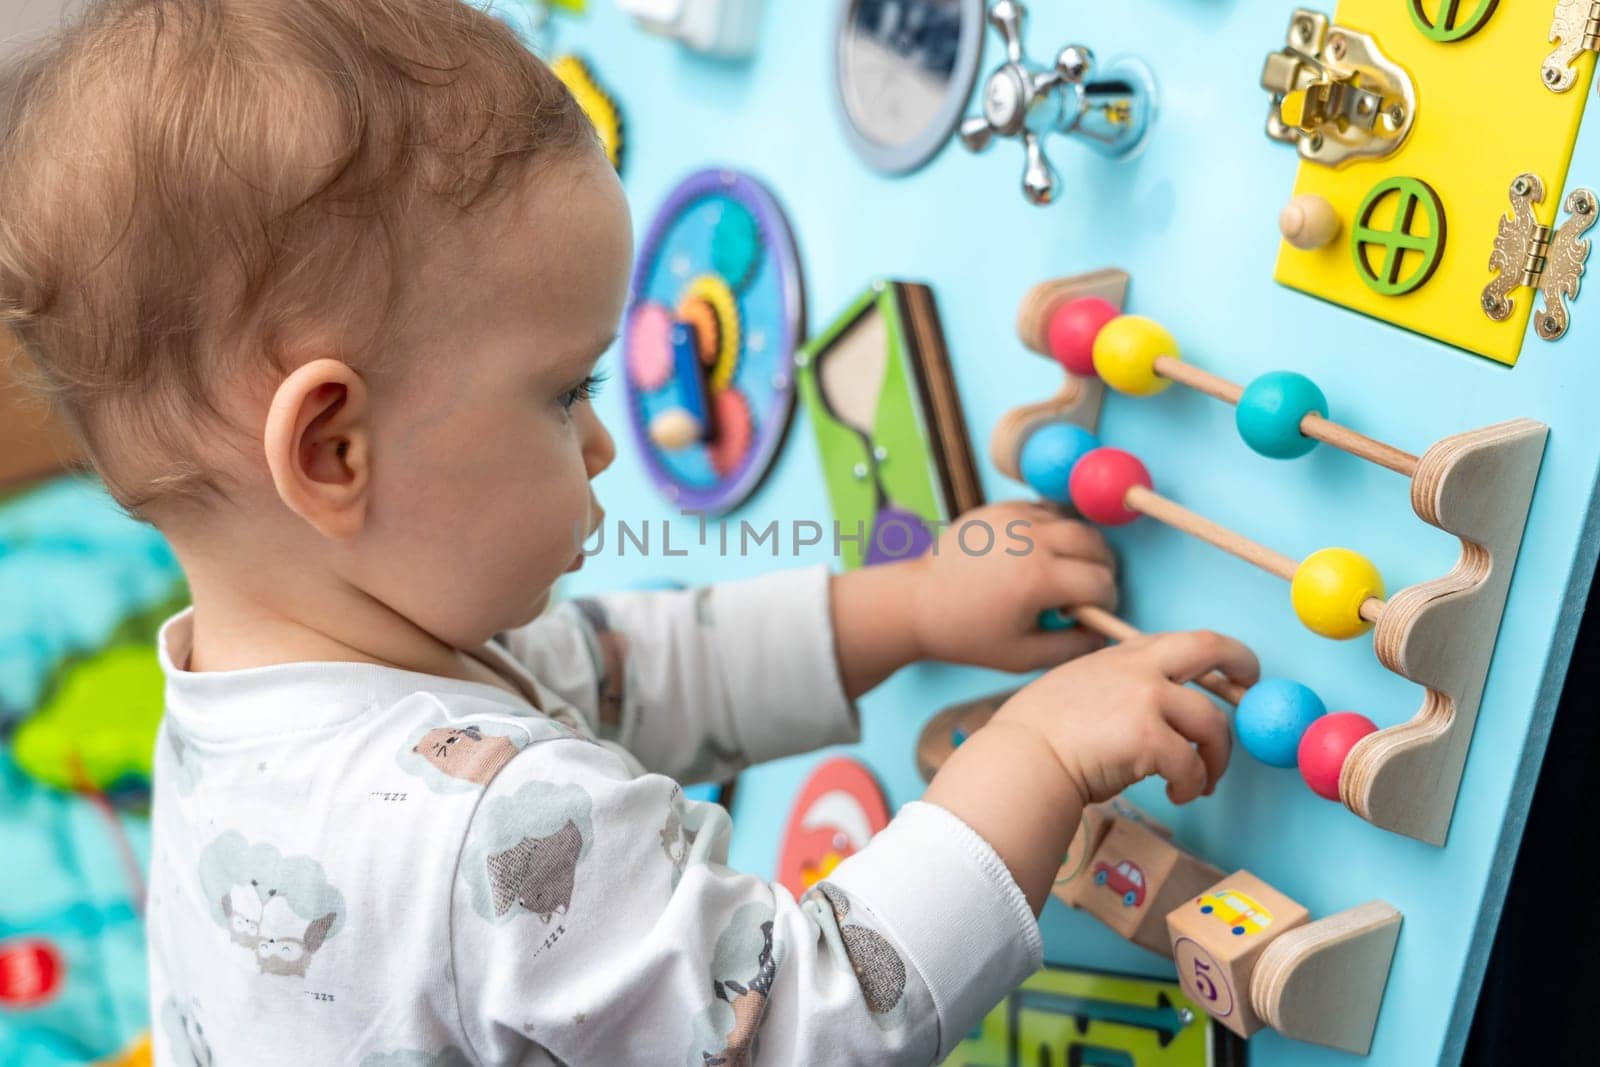 A child enthusiastically plays with toy abacus on a busy board.